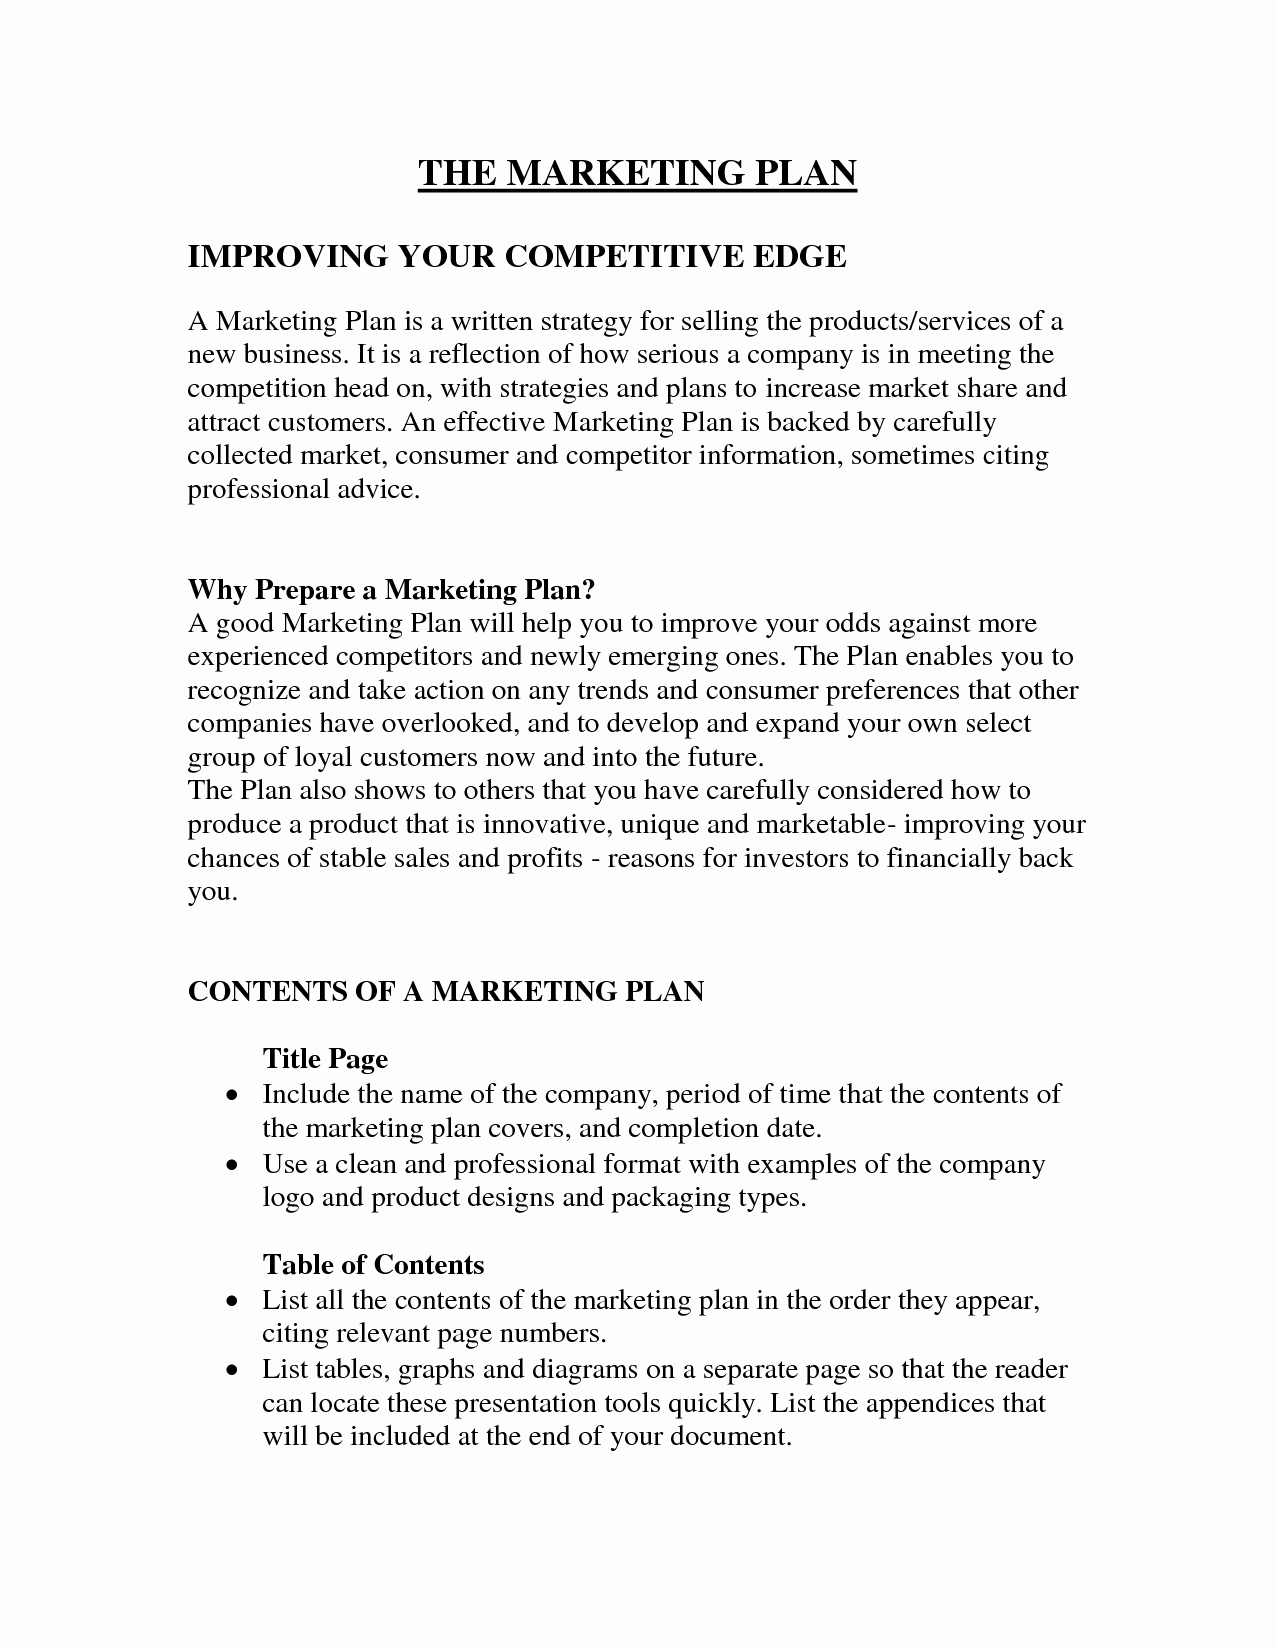 Marketing Plan Outline Template Beautiful Marketing Plan Examples